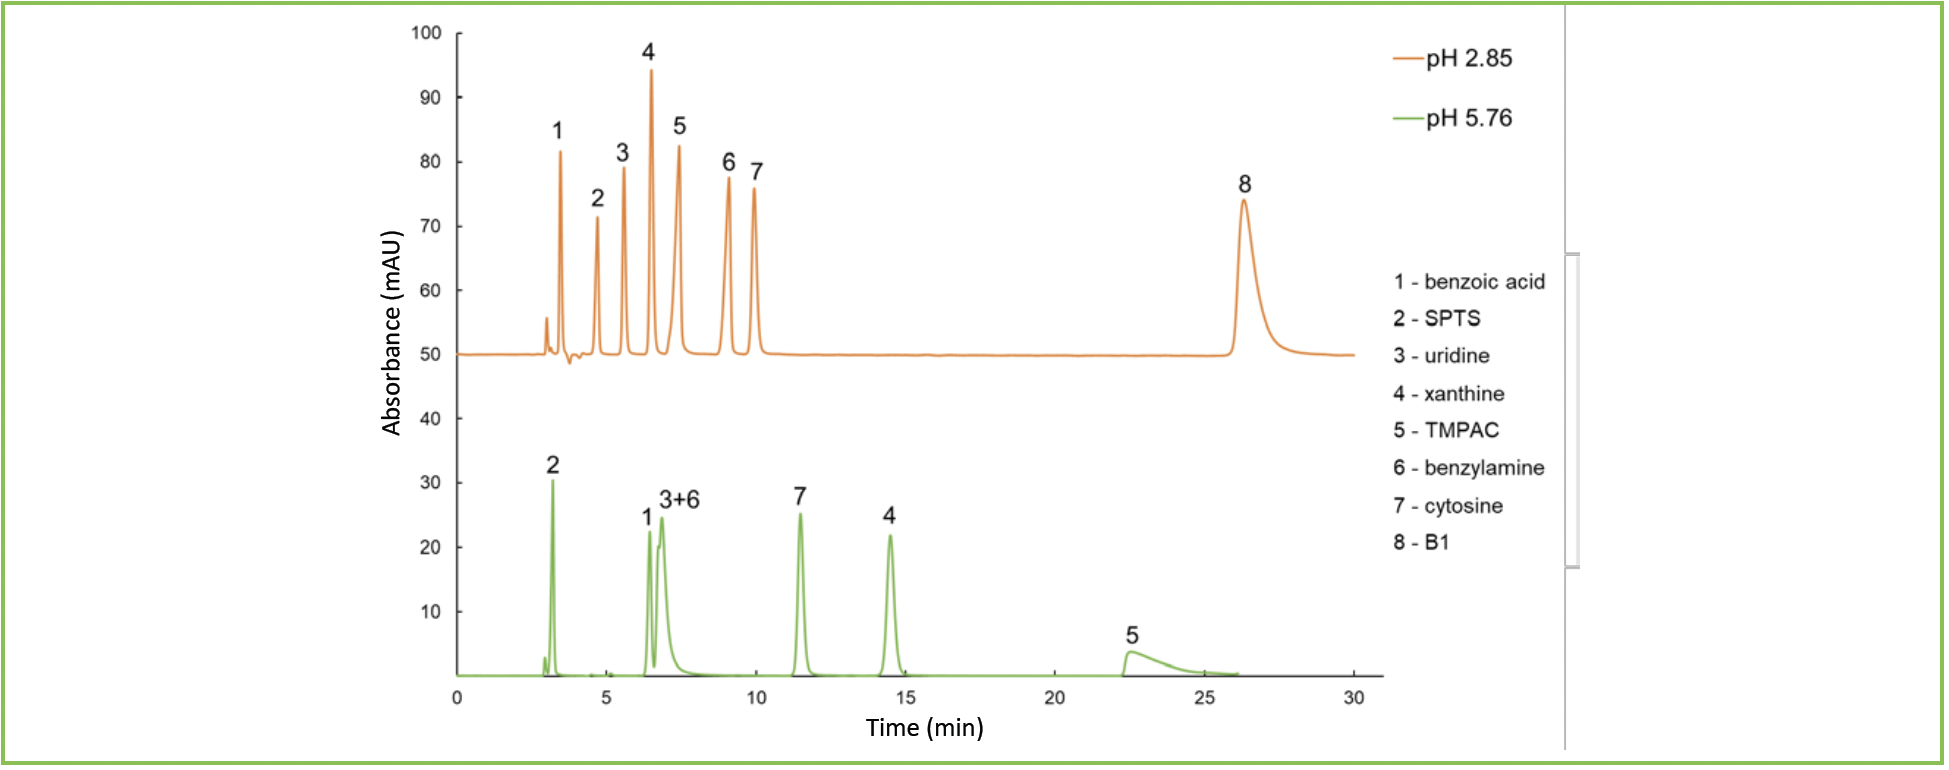 FIGURE 7: The chromatograms of the test mixture (Table II) at fixed sodium concentration in mobile phase of 2.5 mM. Conditions: stationary phase—DIOL 300 (4.6. × 250 mm); mobile phase—sodium formate buffer pH 2.85 or sodium acetate buffer pH 5.76/acetonitrile 10:90 v/v; flow rate 1 mL/ min; UV detection at 254 nm.